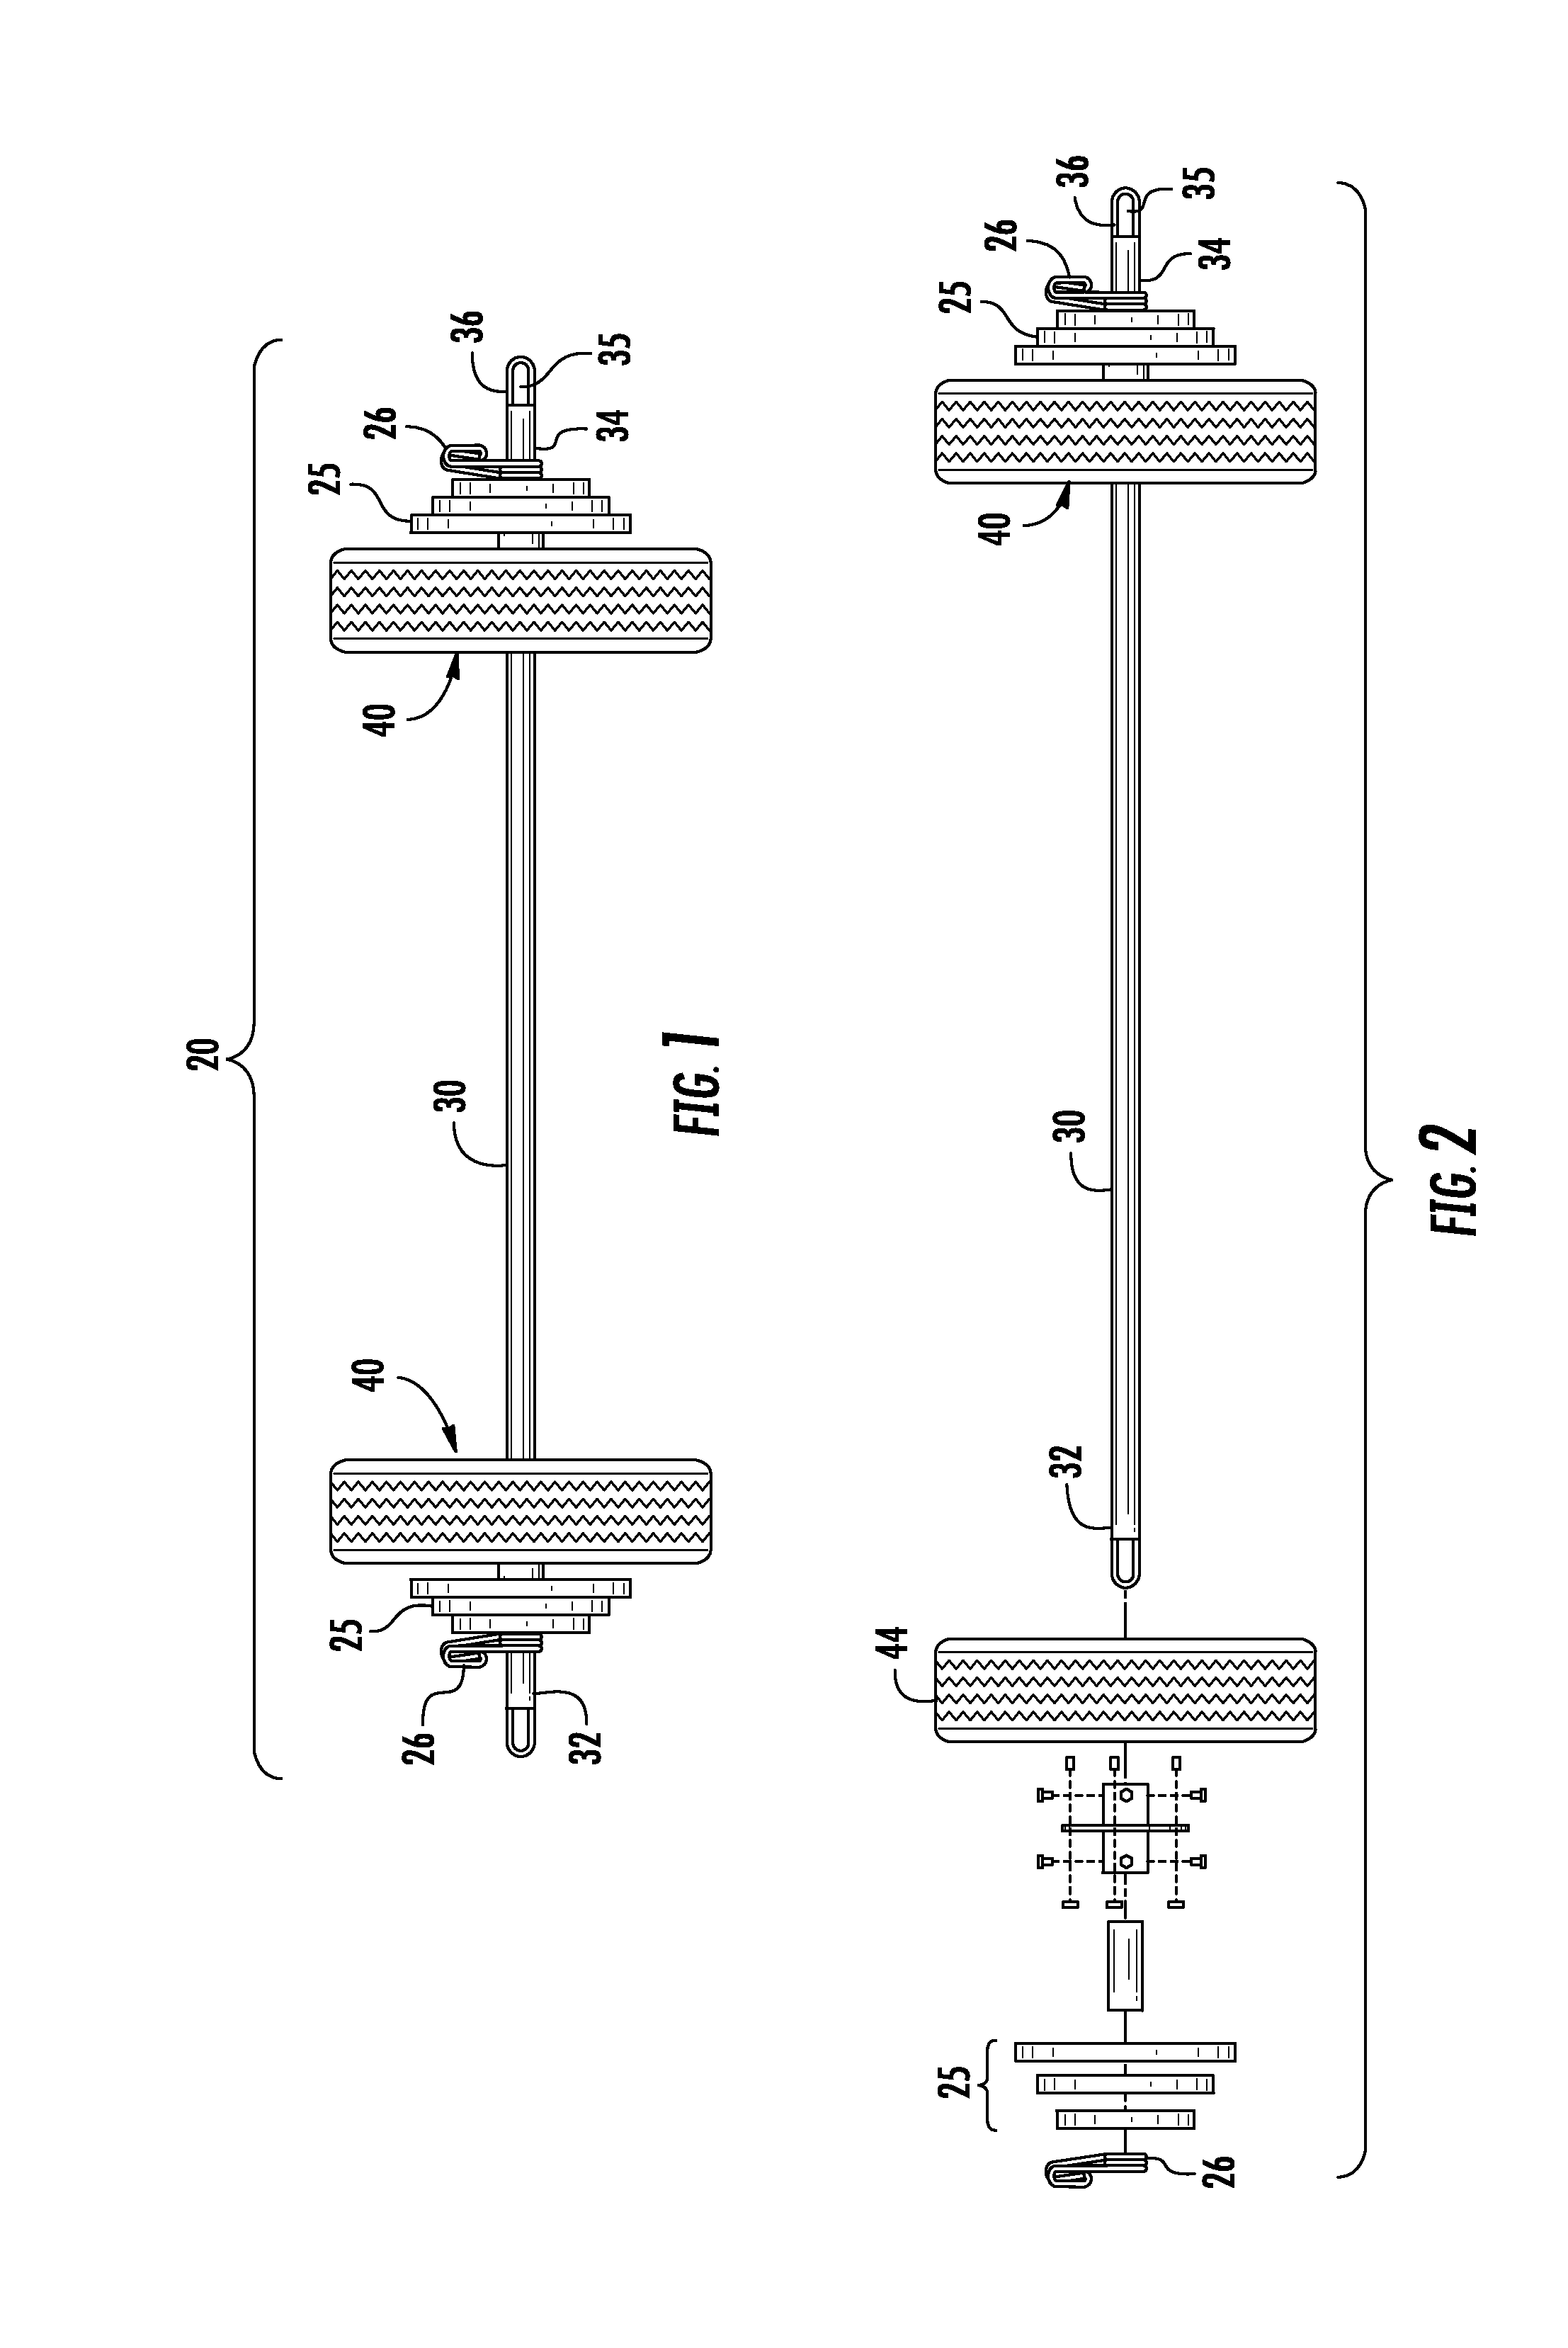 Barbell assembly having impact absorbing weights and swivel end